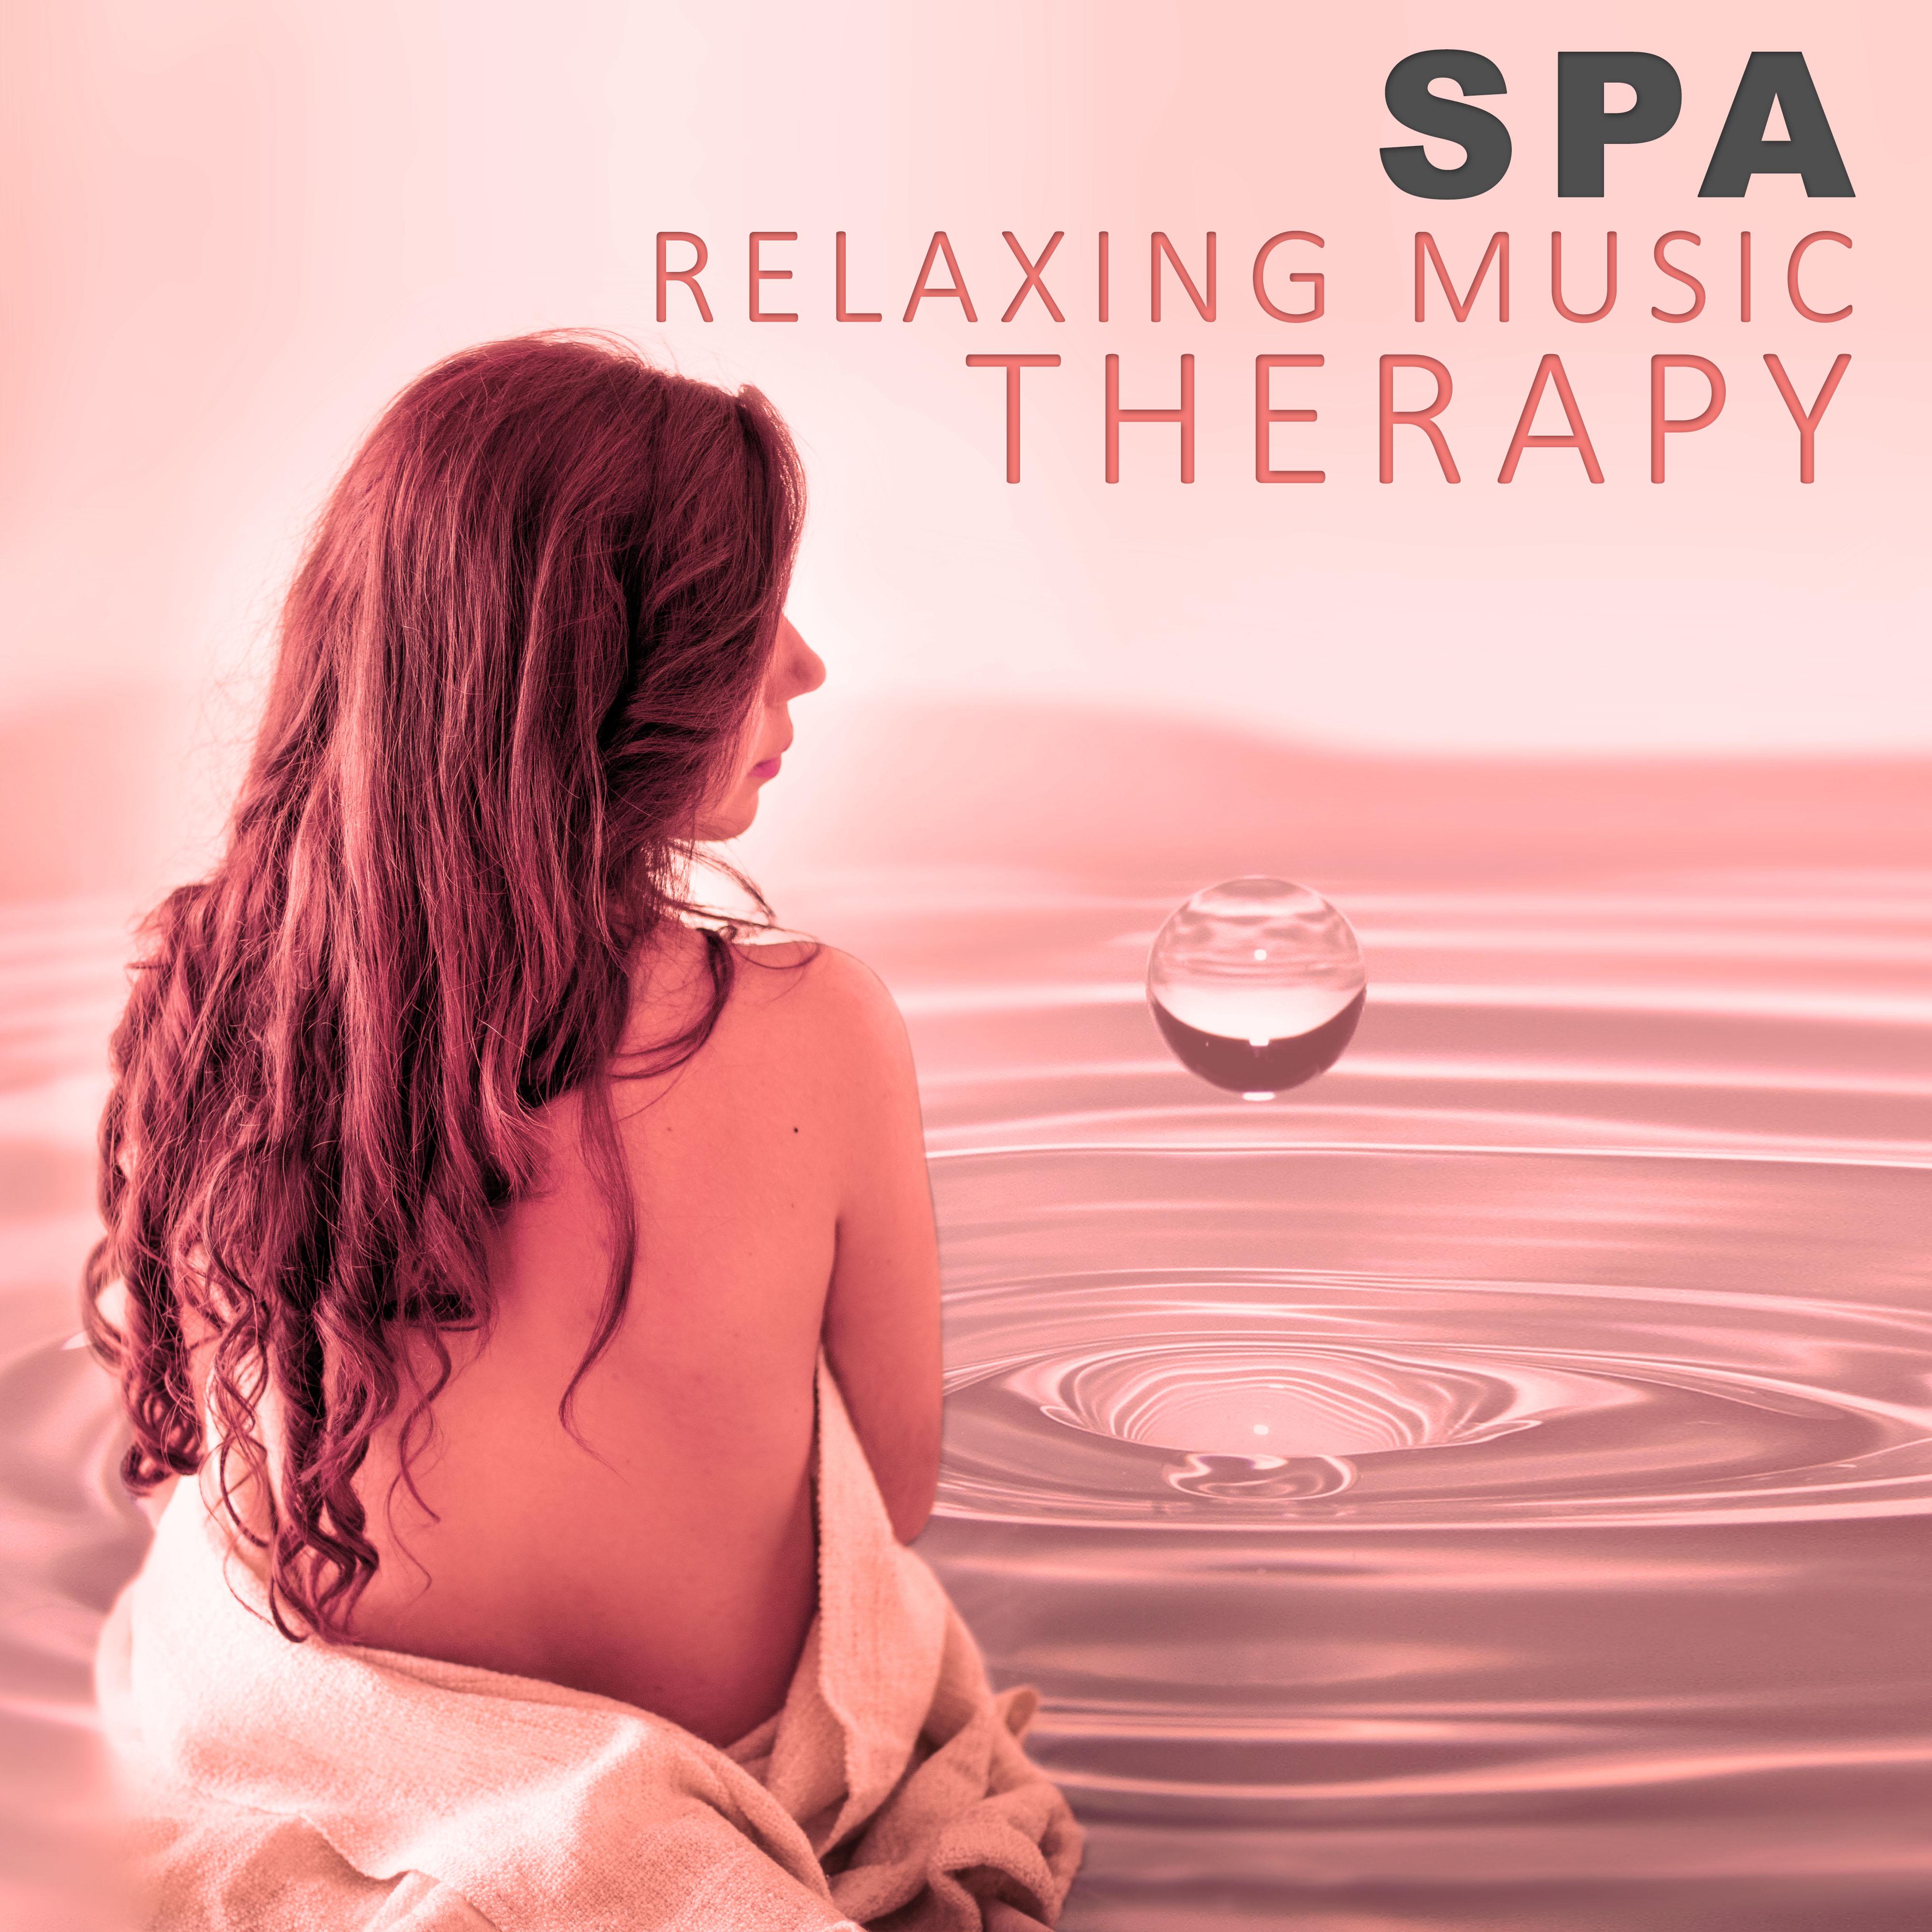 Spa Relaxing Music Therapy  Nature Sounds, Stress Relief, Inner Silence, Ambient, Pure Relaxation, Spa, Massage